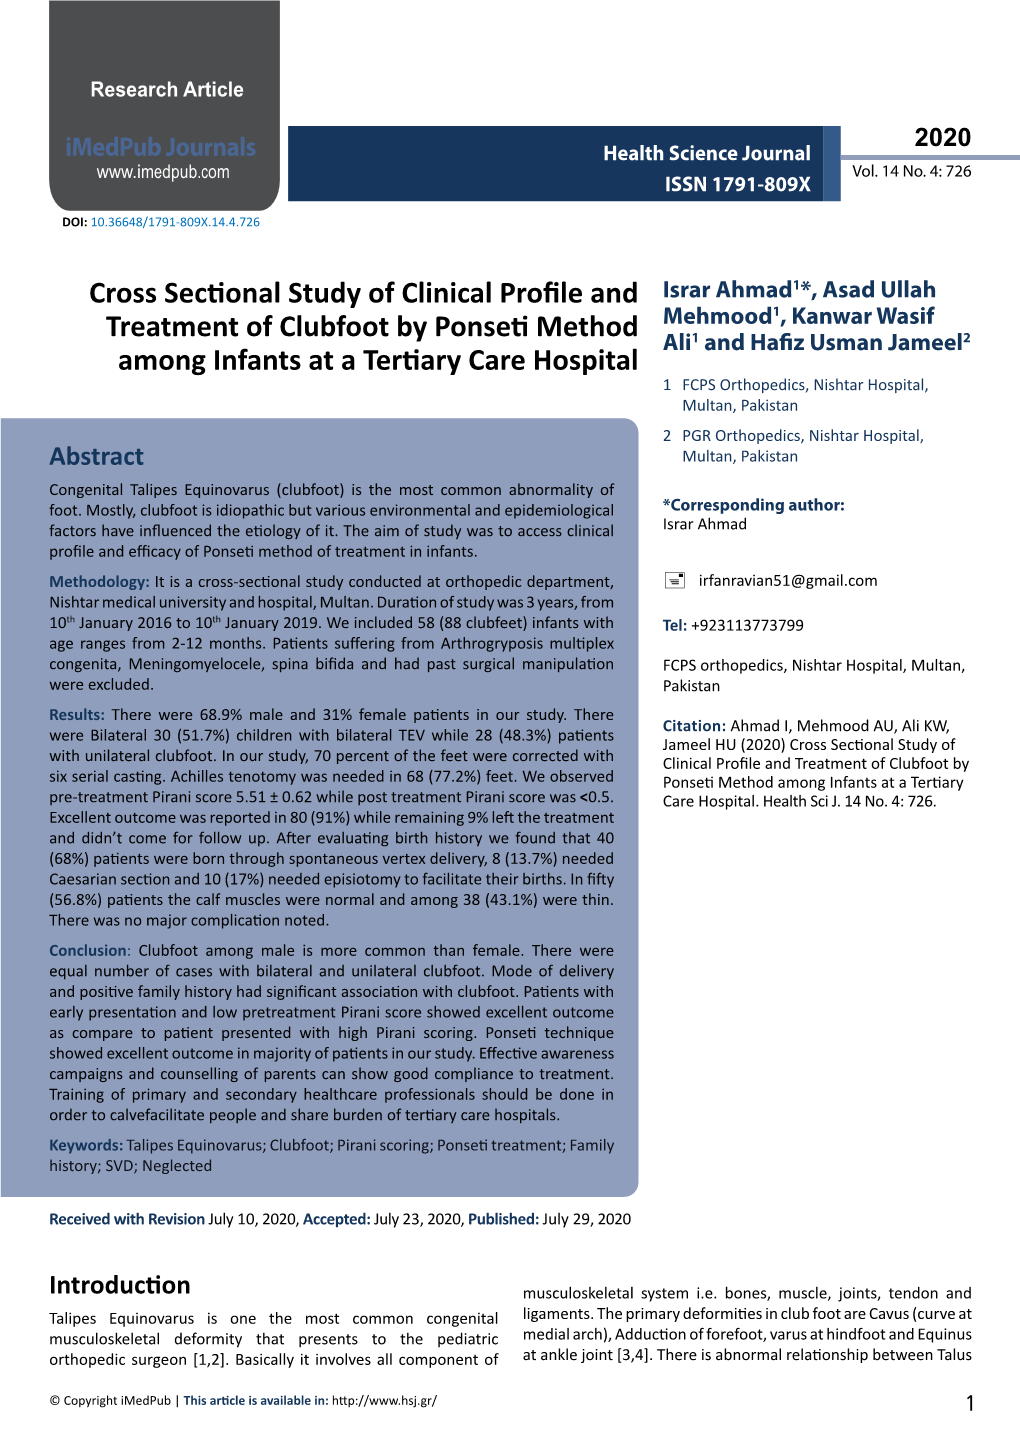 Cross Sectional Study of Clinical Profile and Treatment of Clubfoot By